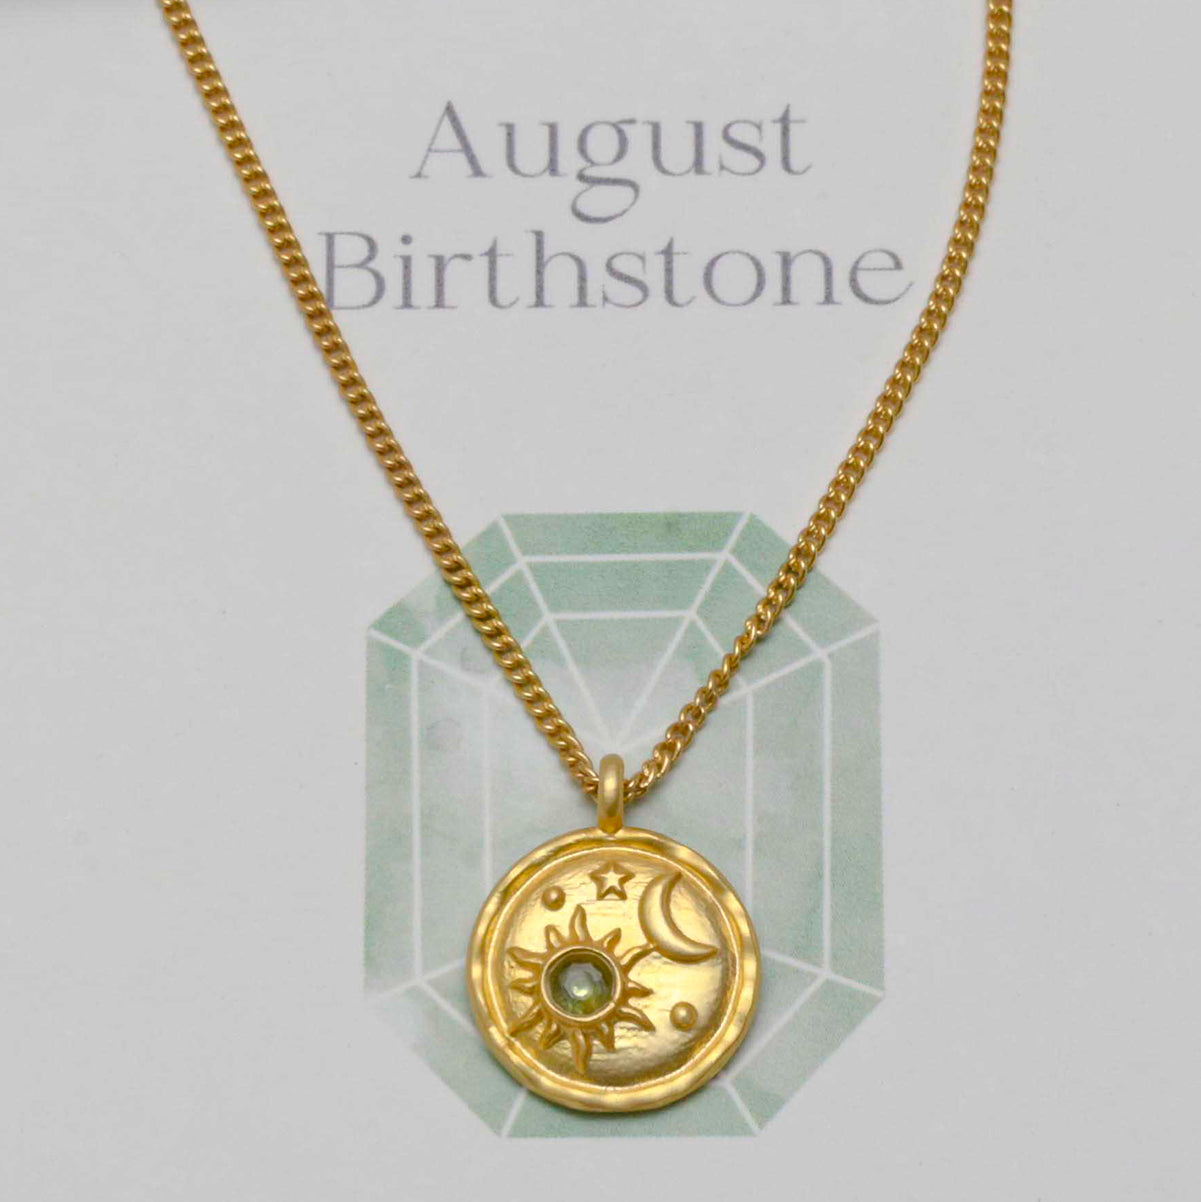 August Birthstone Necklace With Peridot